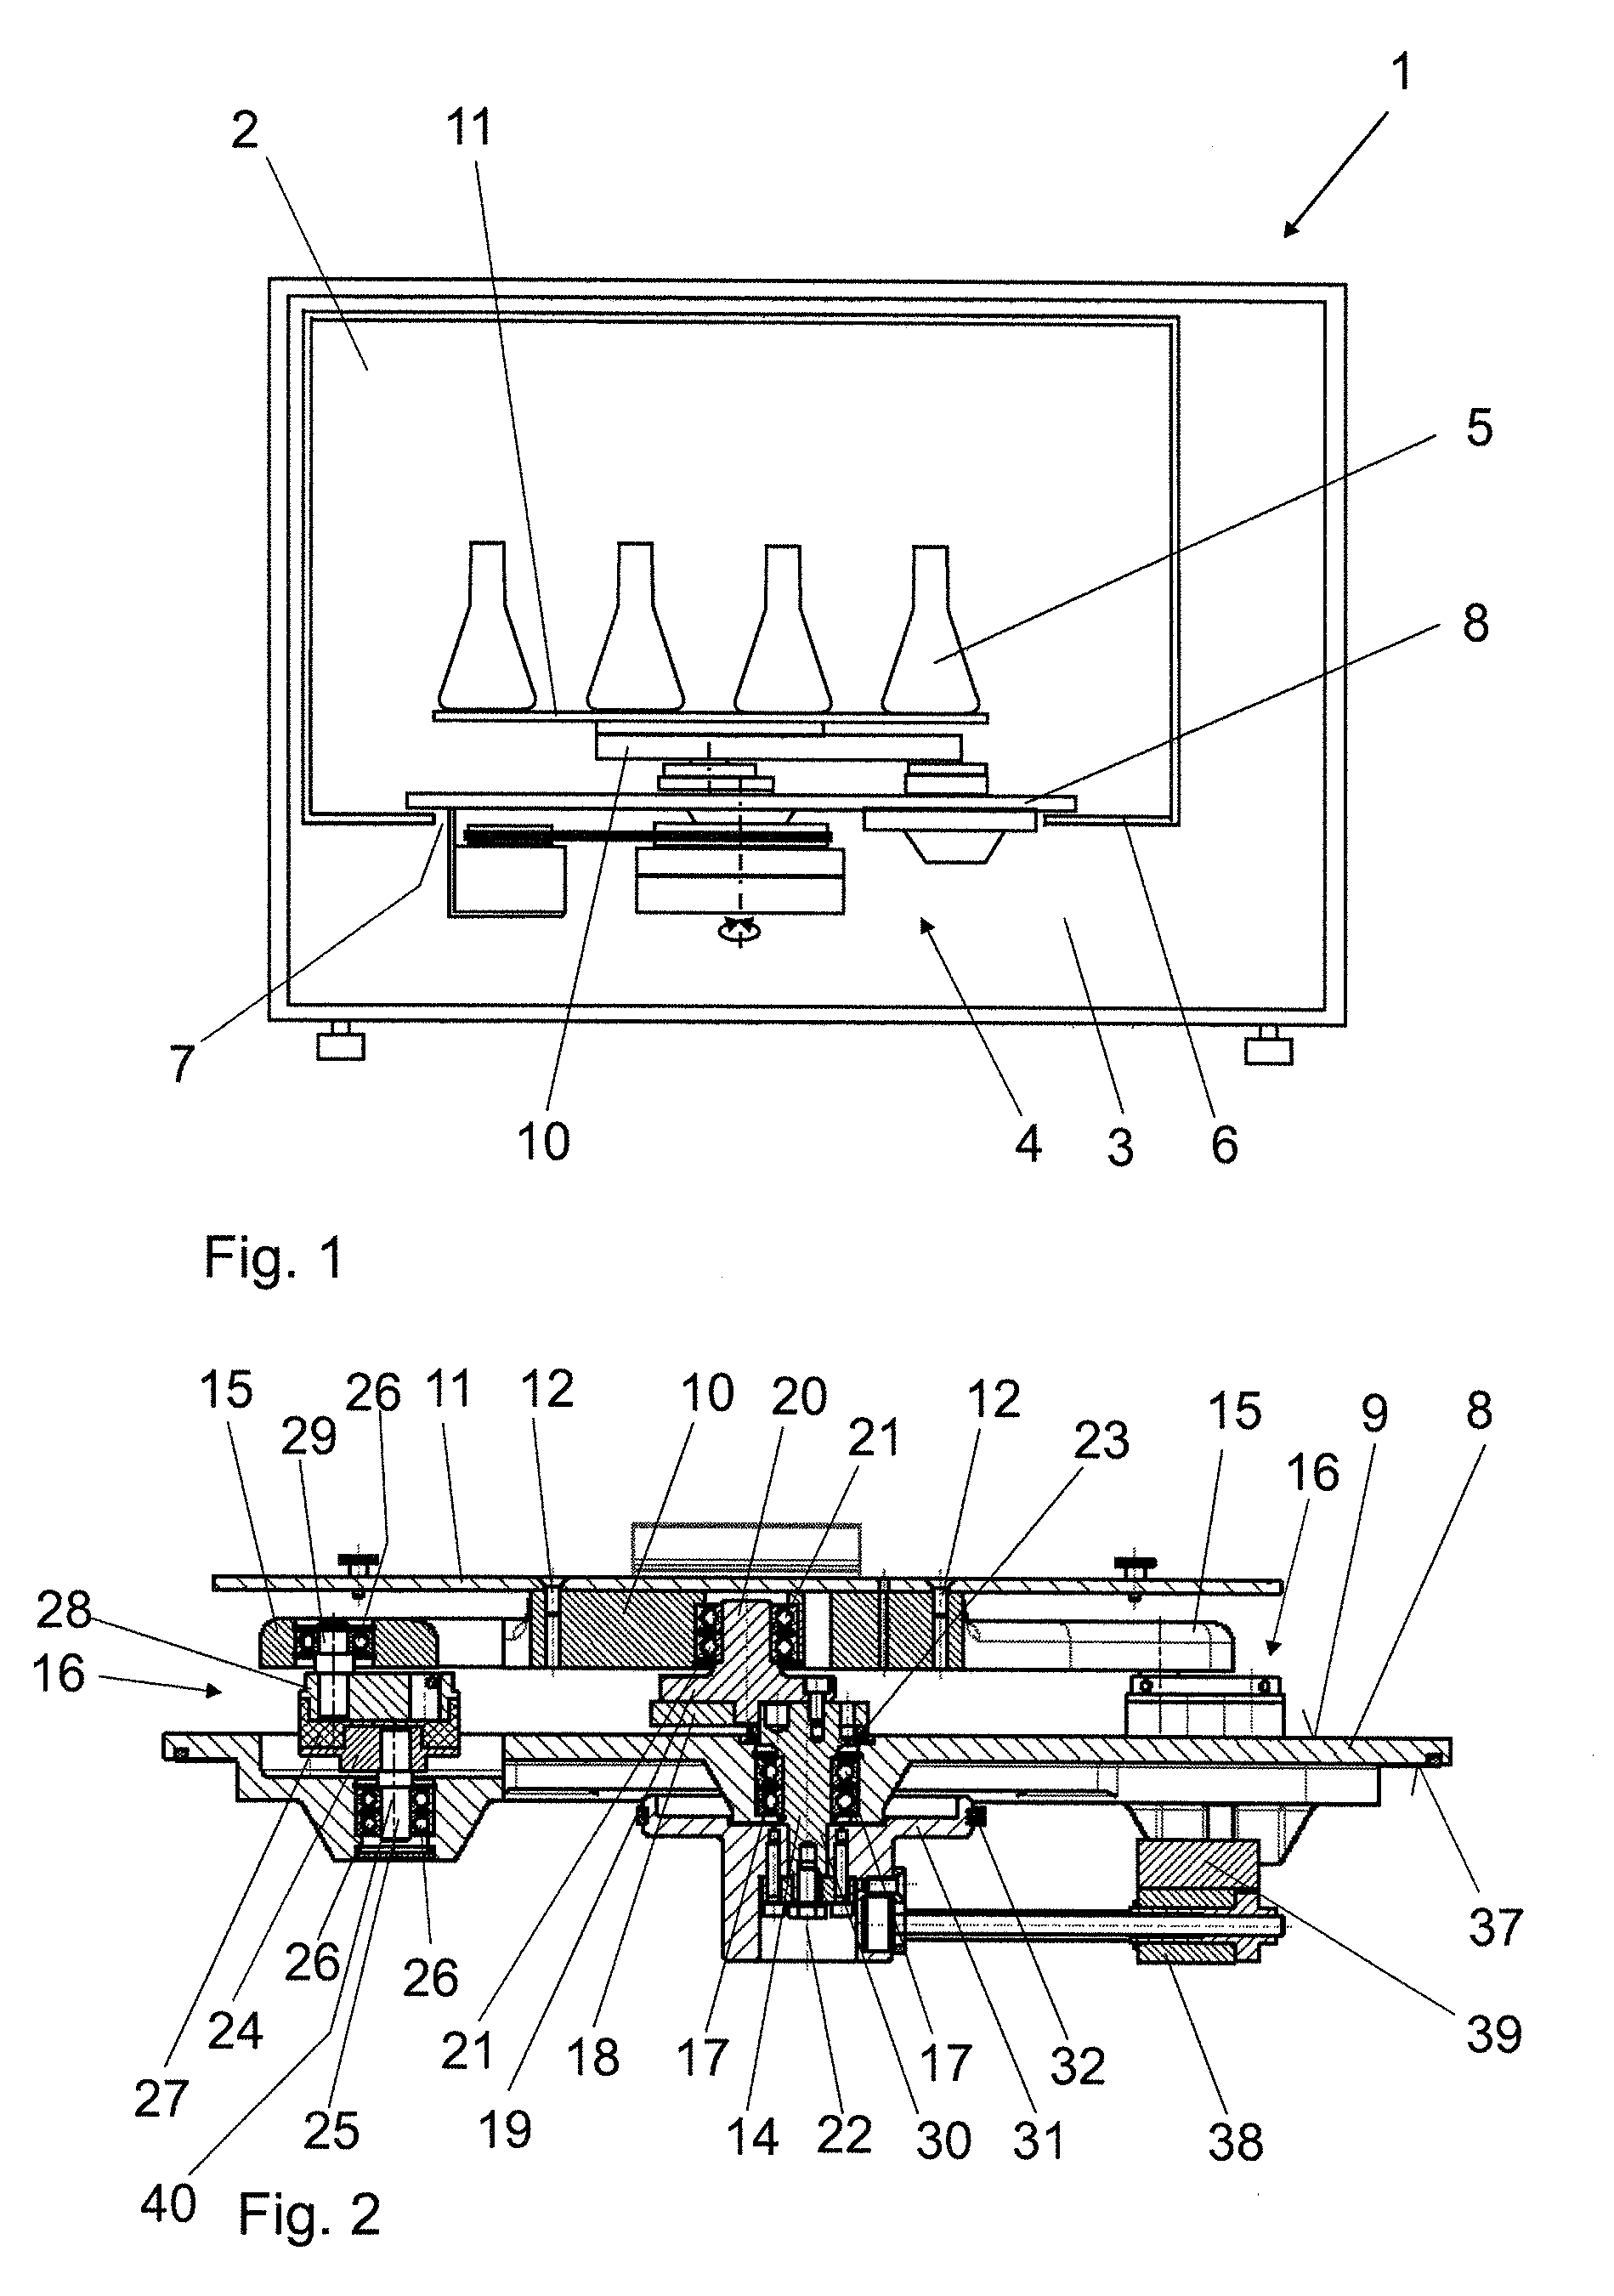 Incubator comprising a shaking device